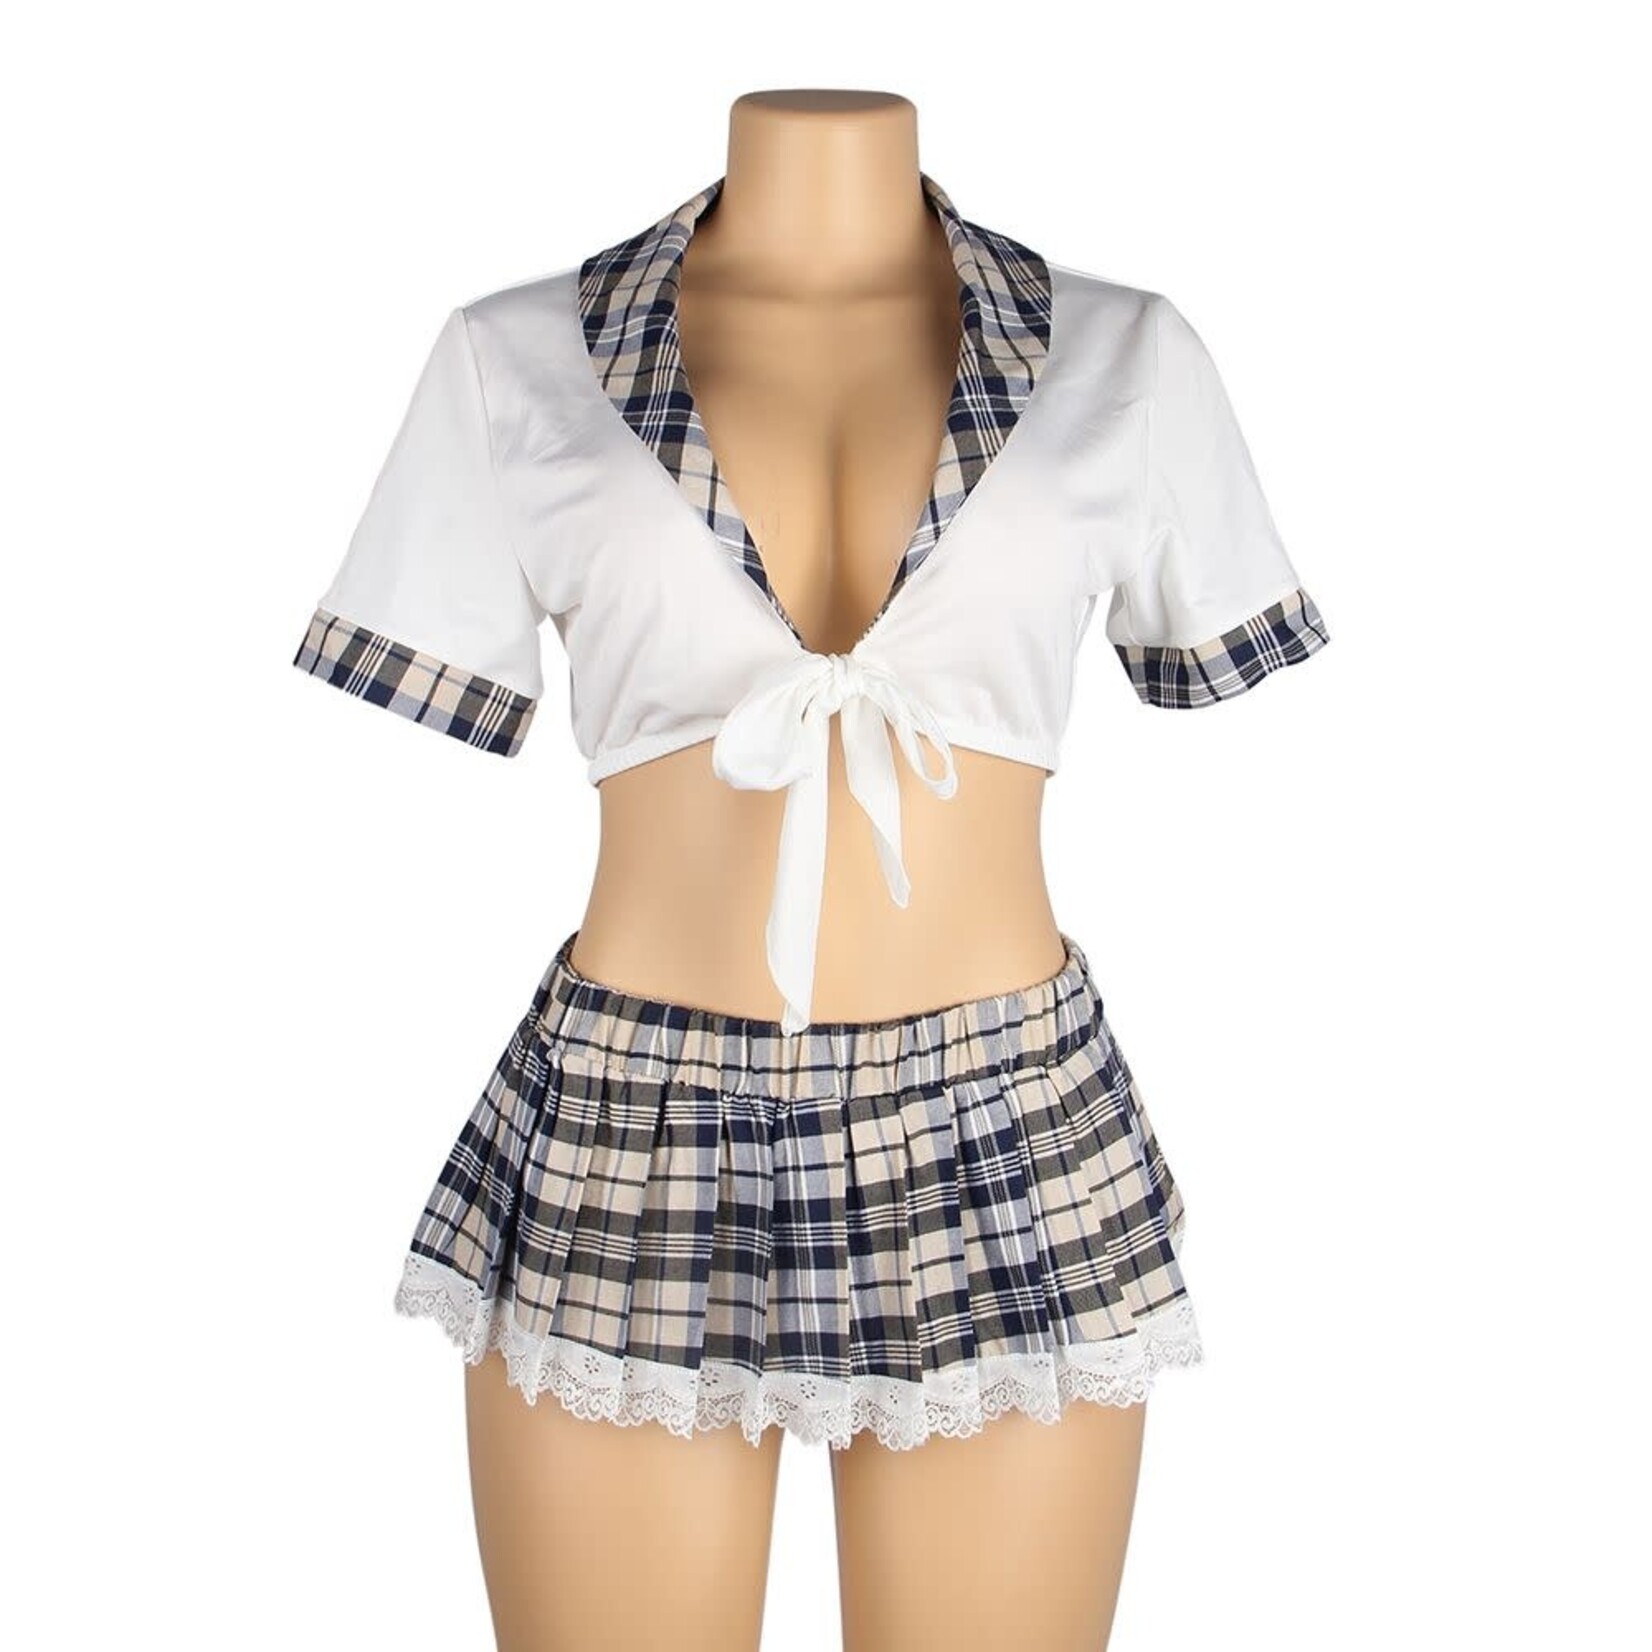 OH YEAH! -  SEXY WHITE CROP TOP PLAID SKIRT COSPLAY SUIT UNIFORM 3XL-4XL